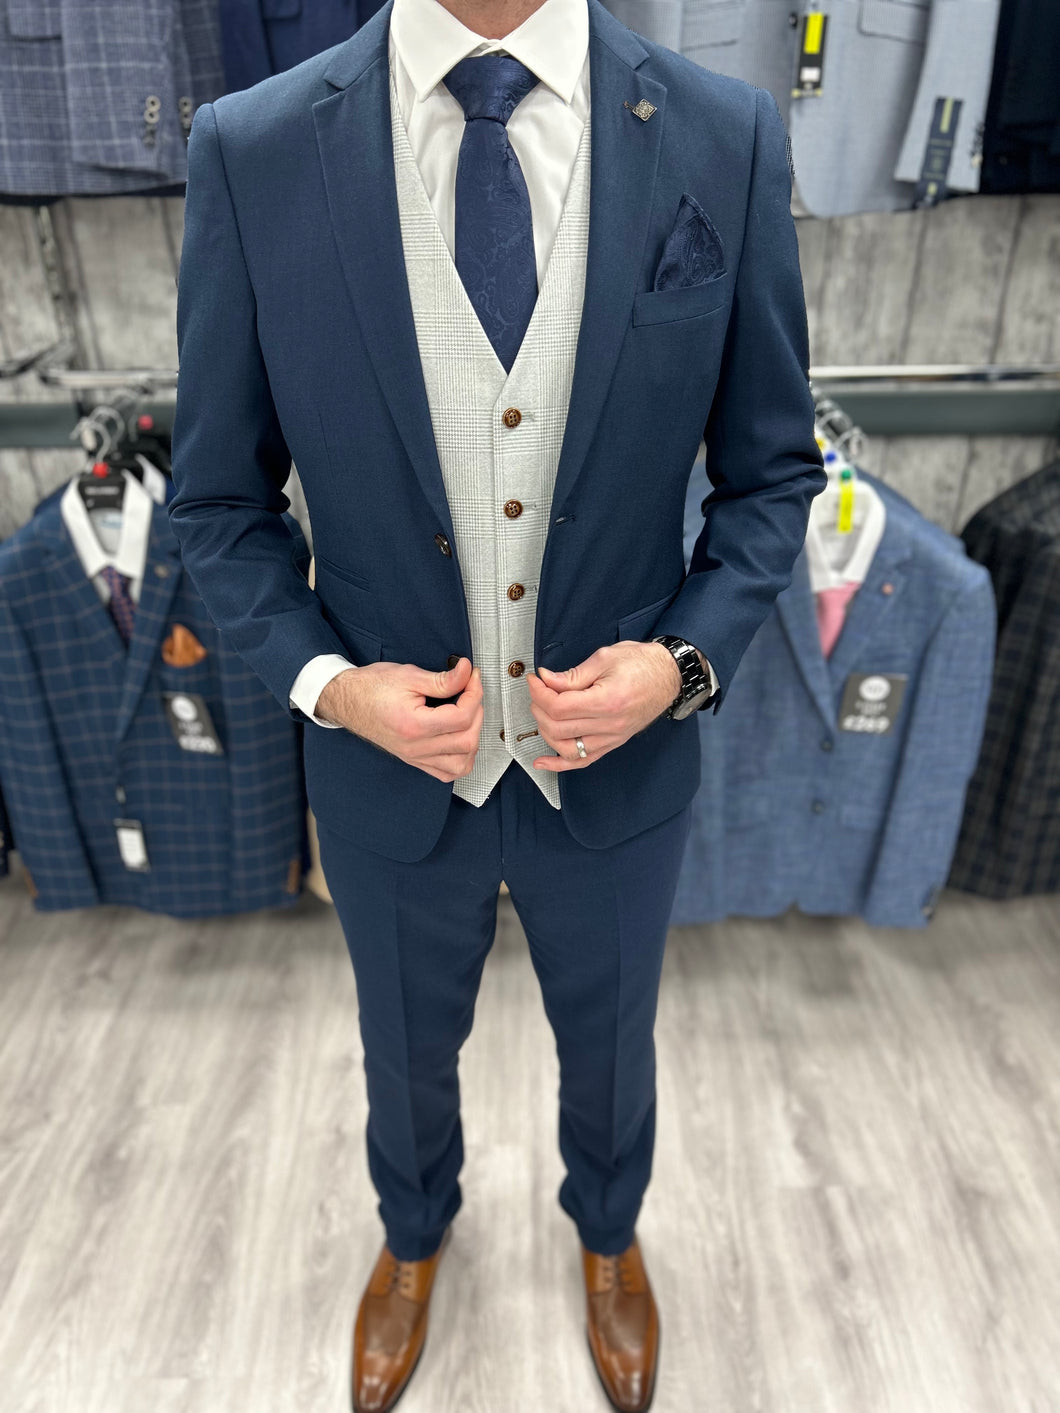 Calvin Blue 3 Piece with Mark waistcoat suit for hire (Price includes £40 deposit)